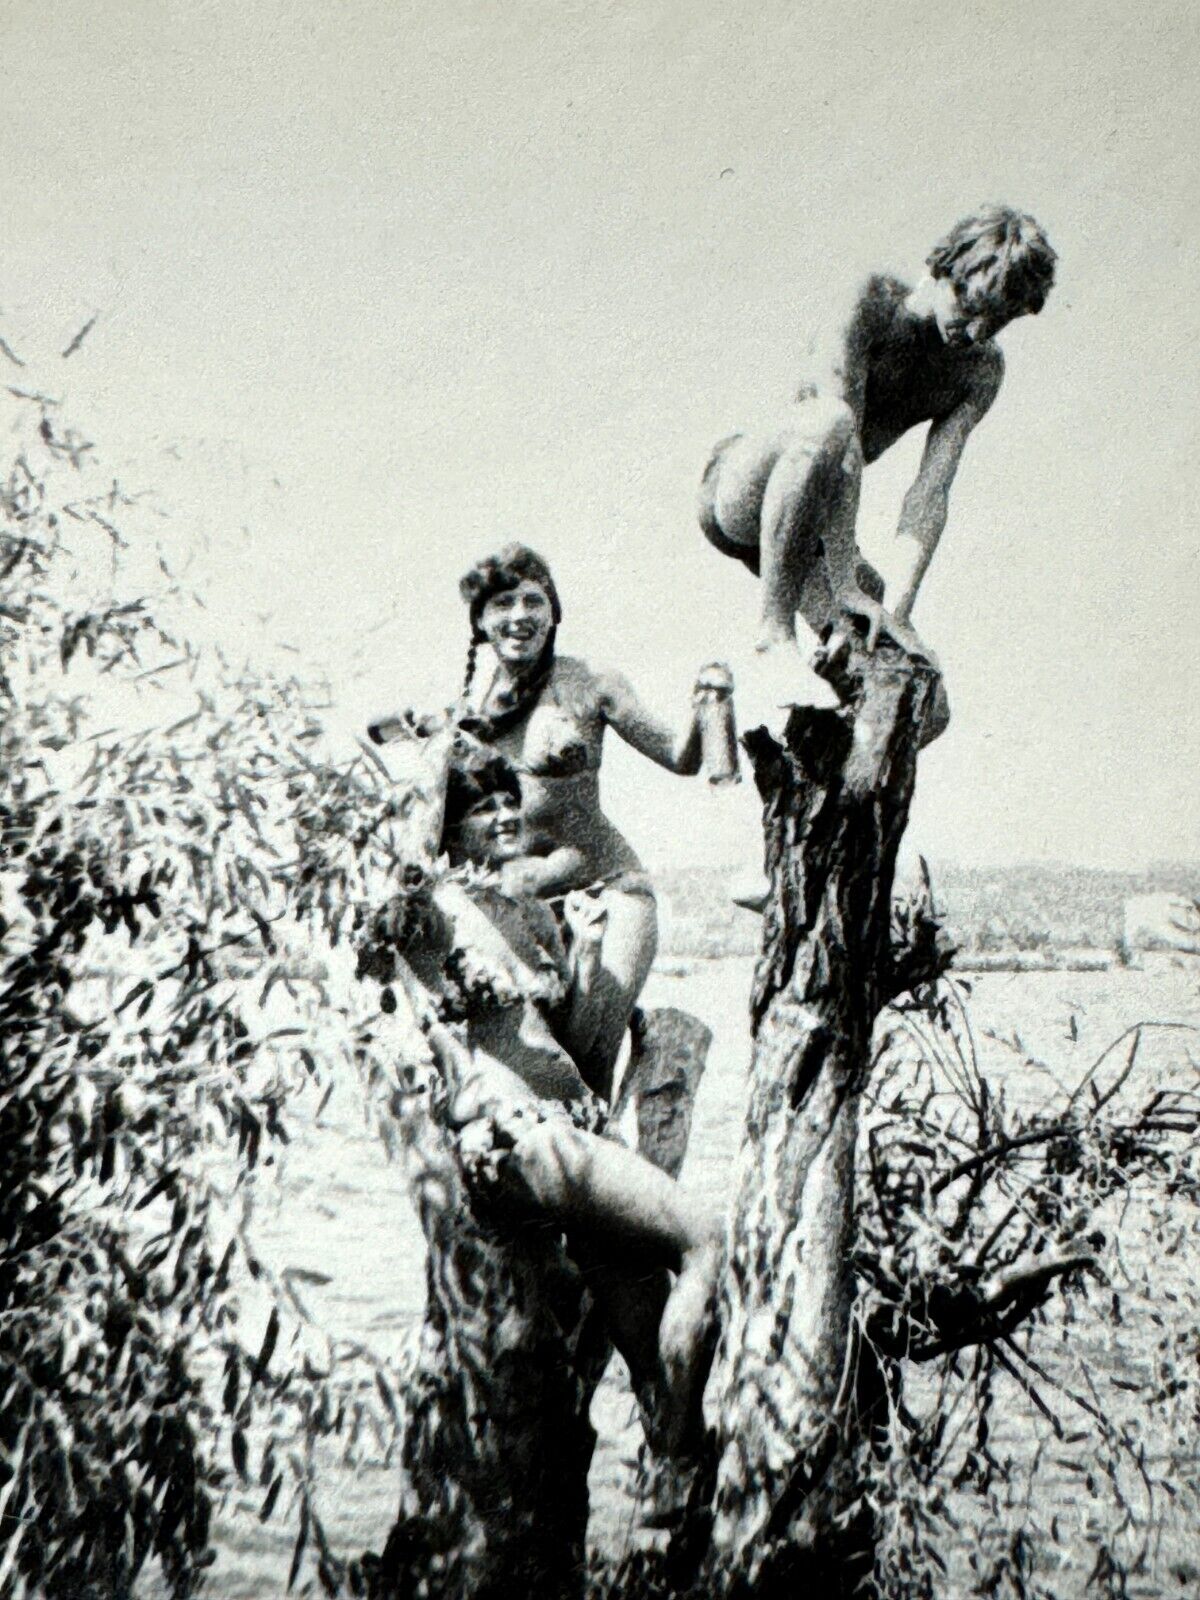 1970s Young Pretty Women Female Shirtless Guy Climbing Tree Vintage Photo